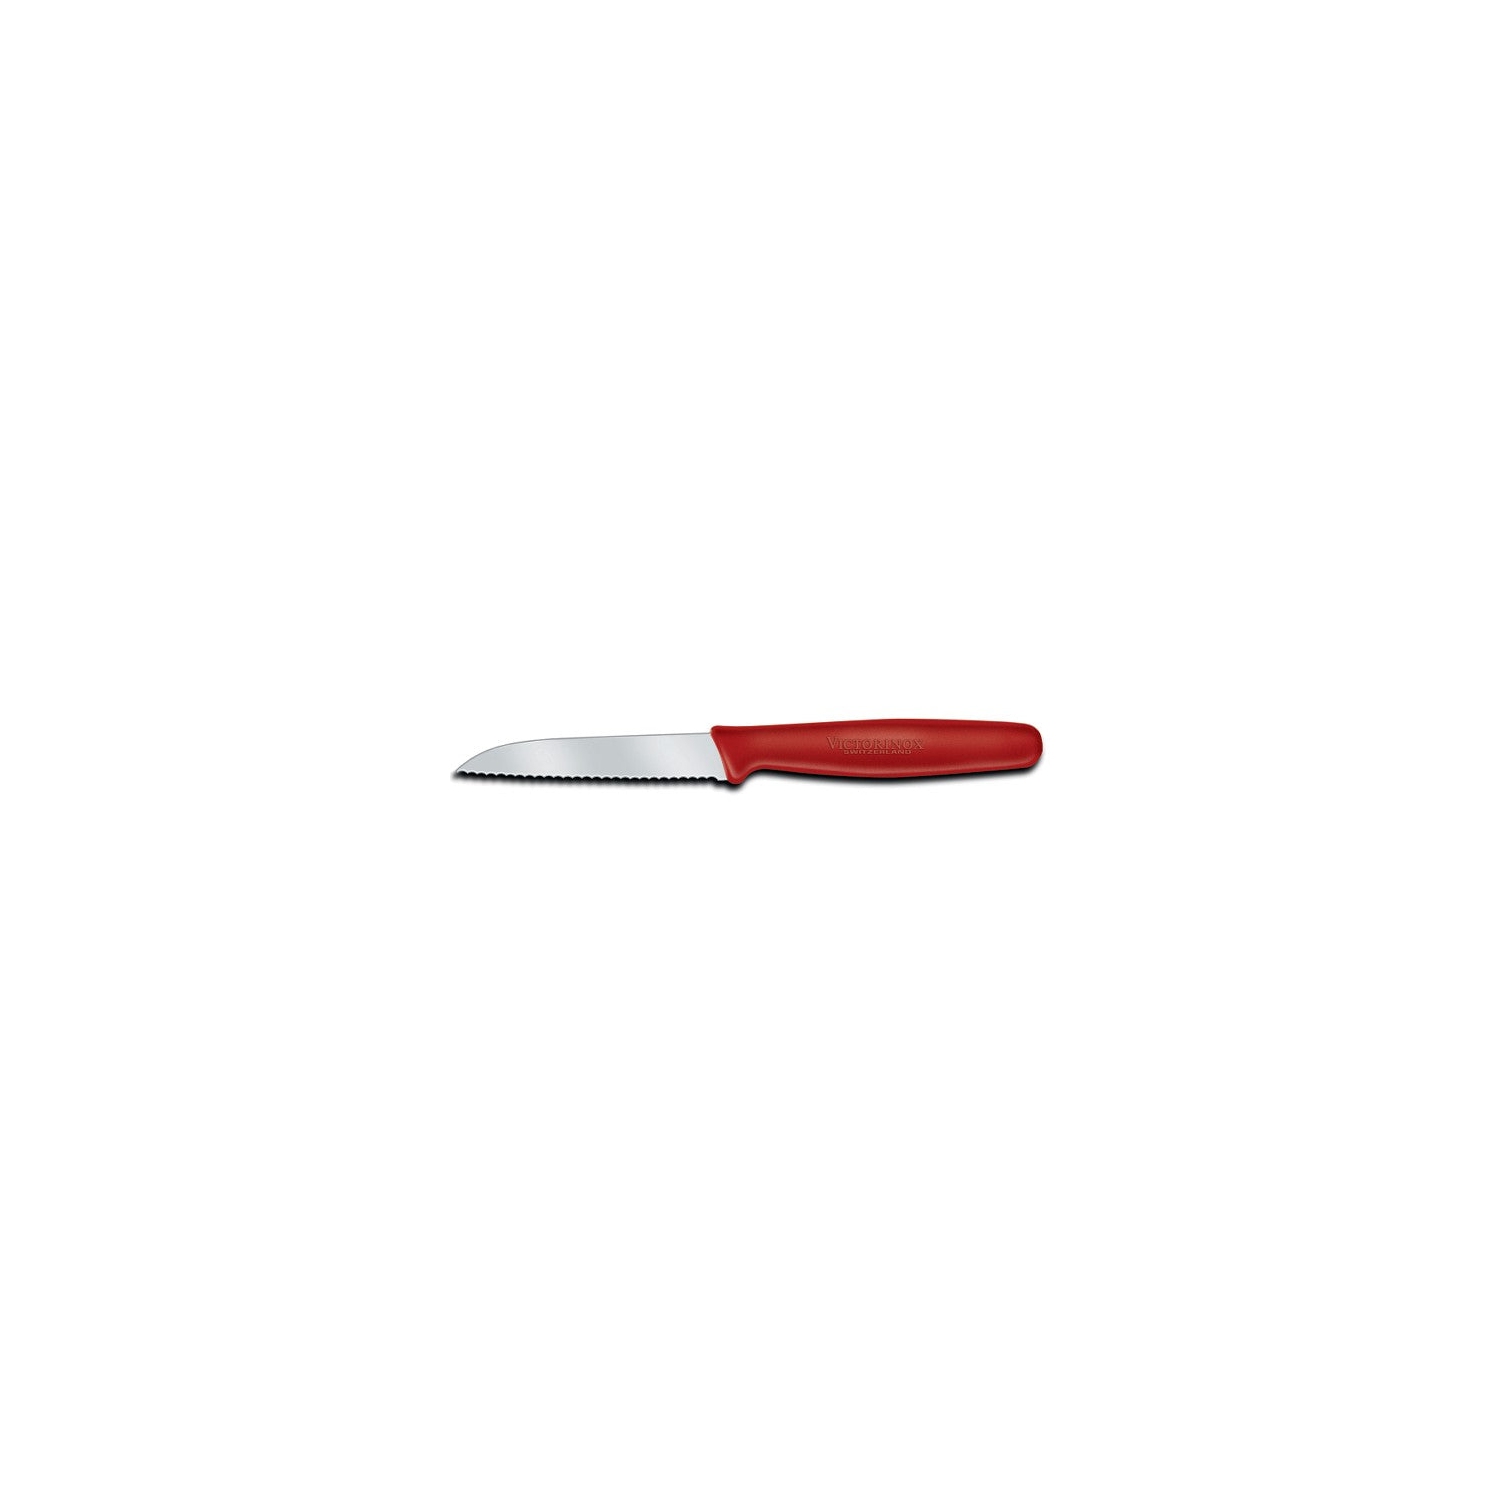 Victorinox 3.25" Serrated Paring Knife (Red) 6.7431